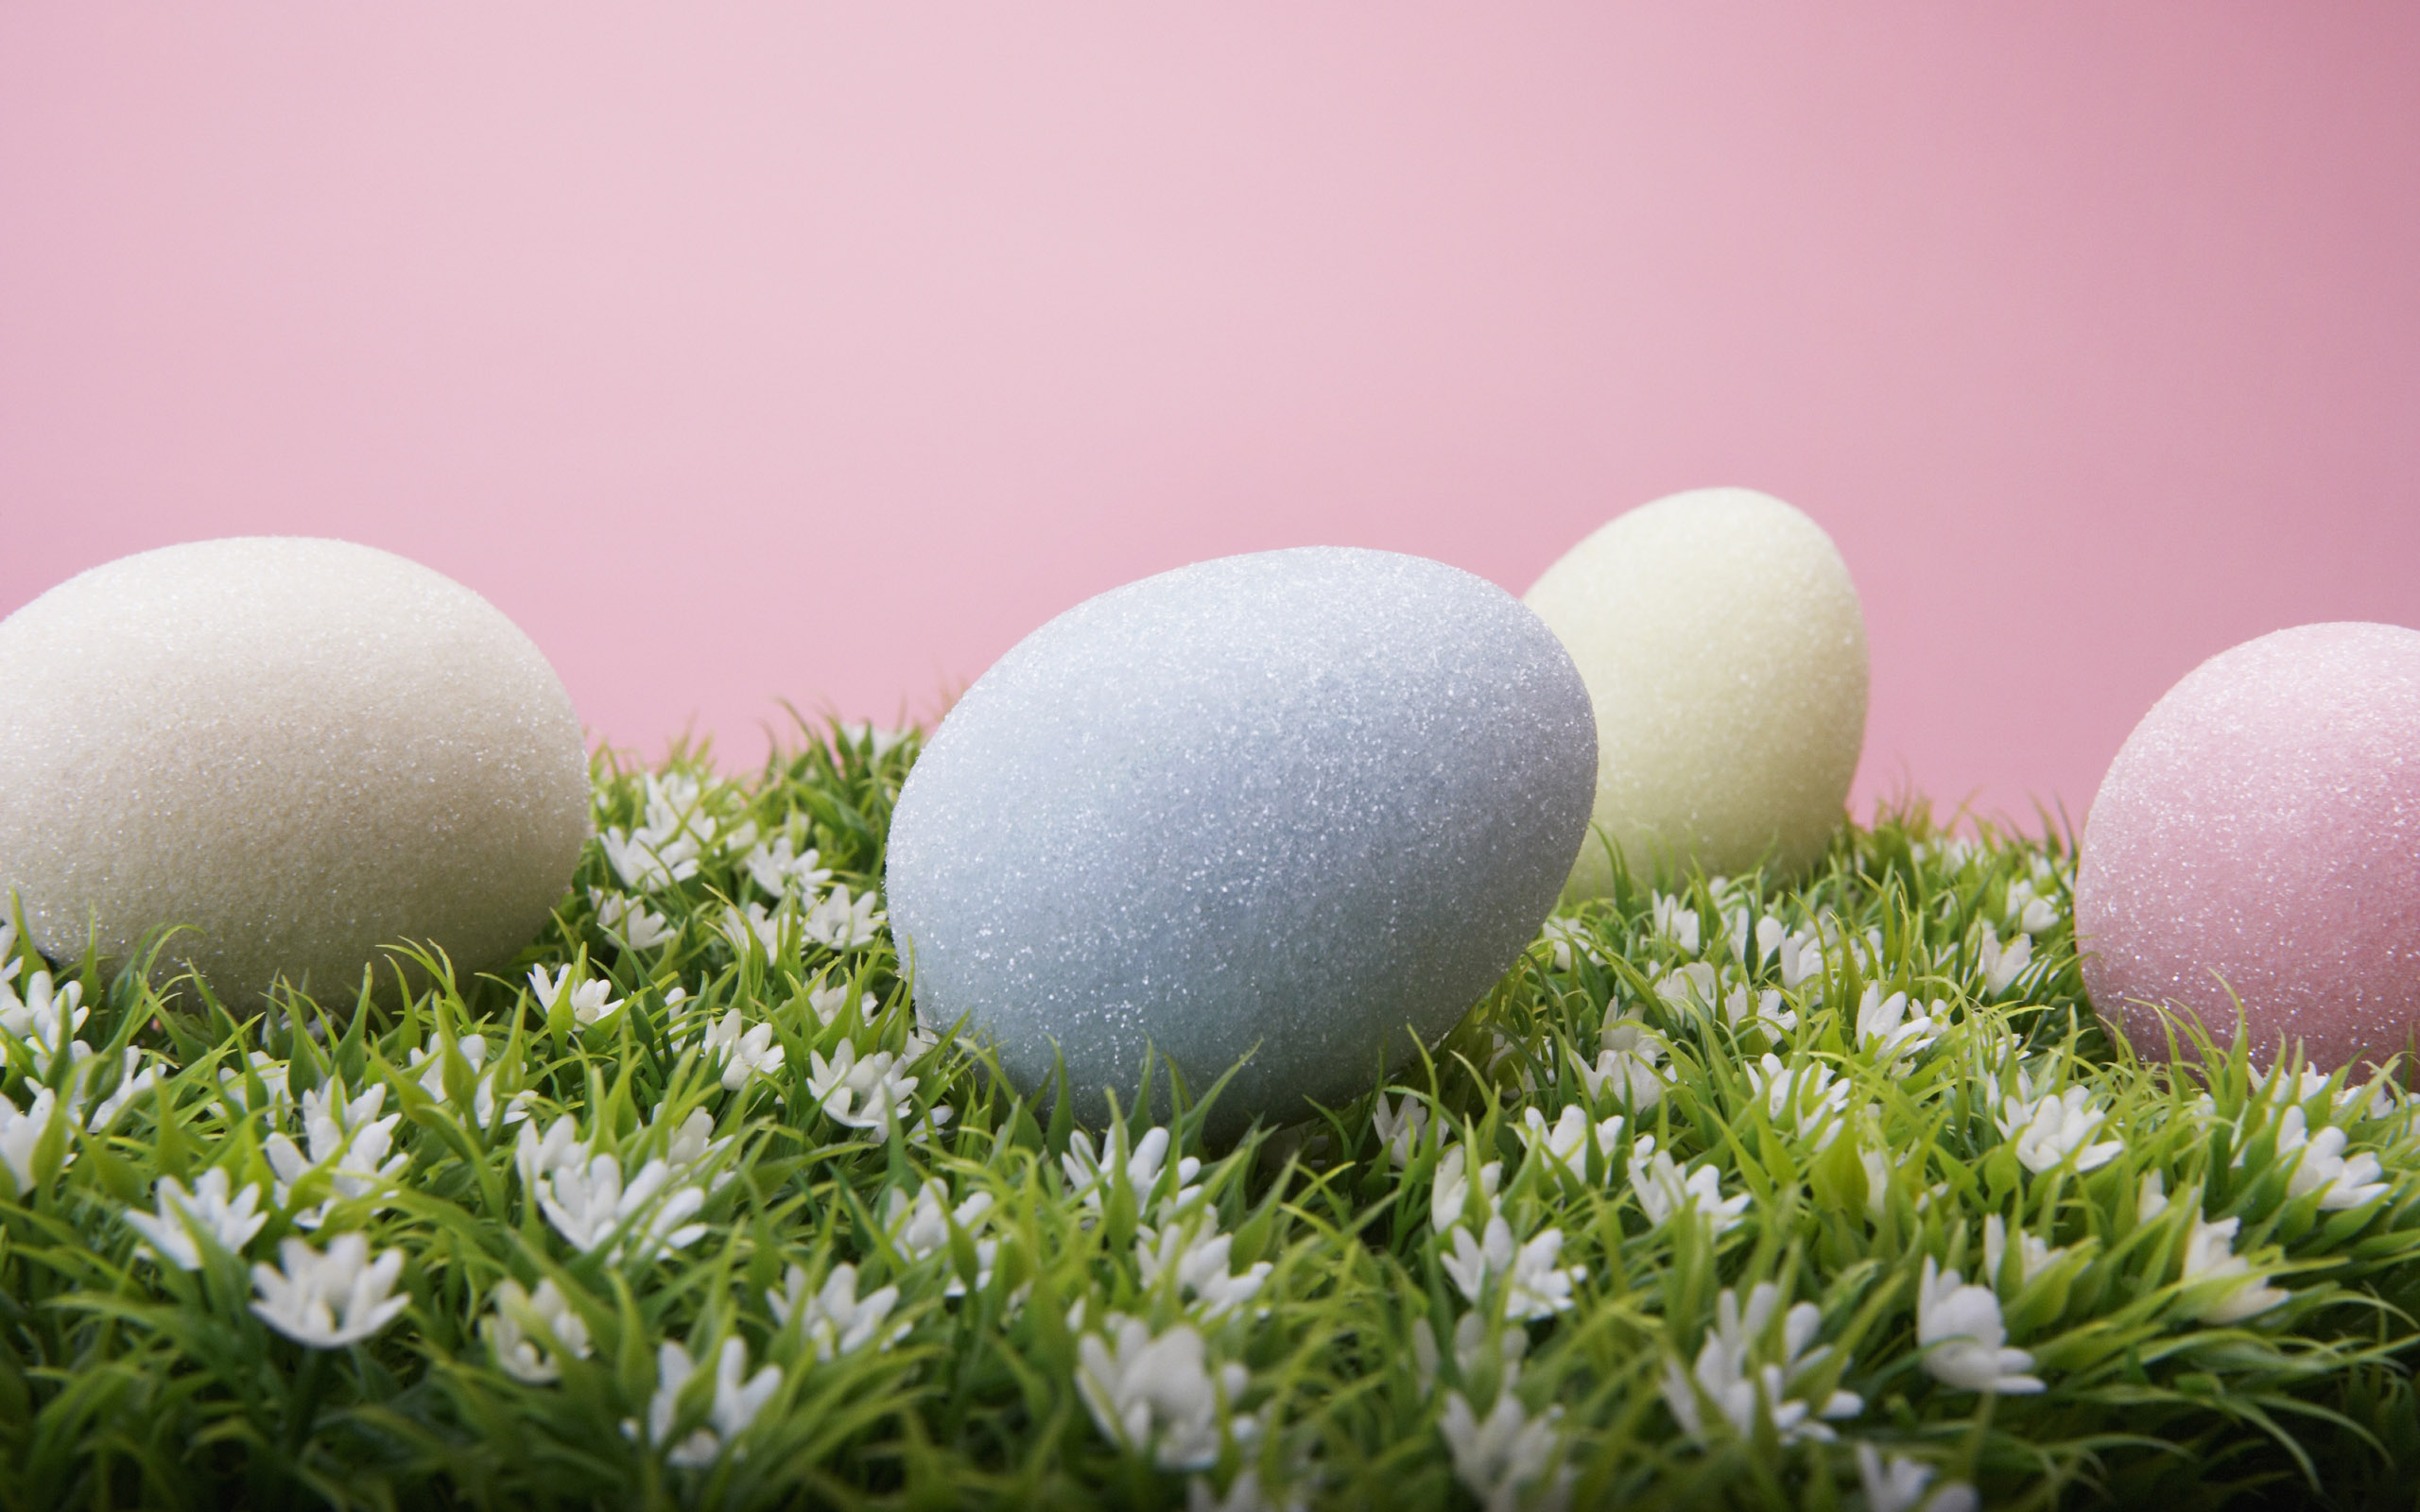 The Easter Wallpaper Category Of HD